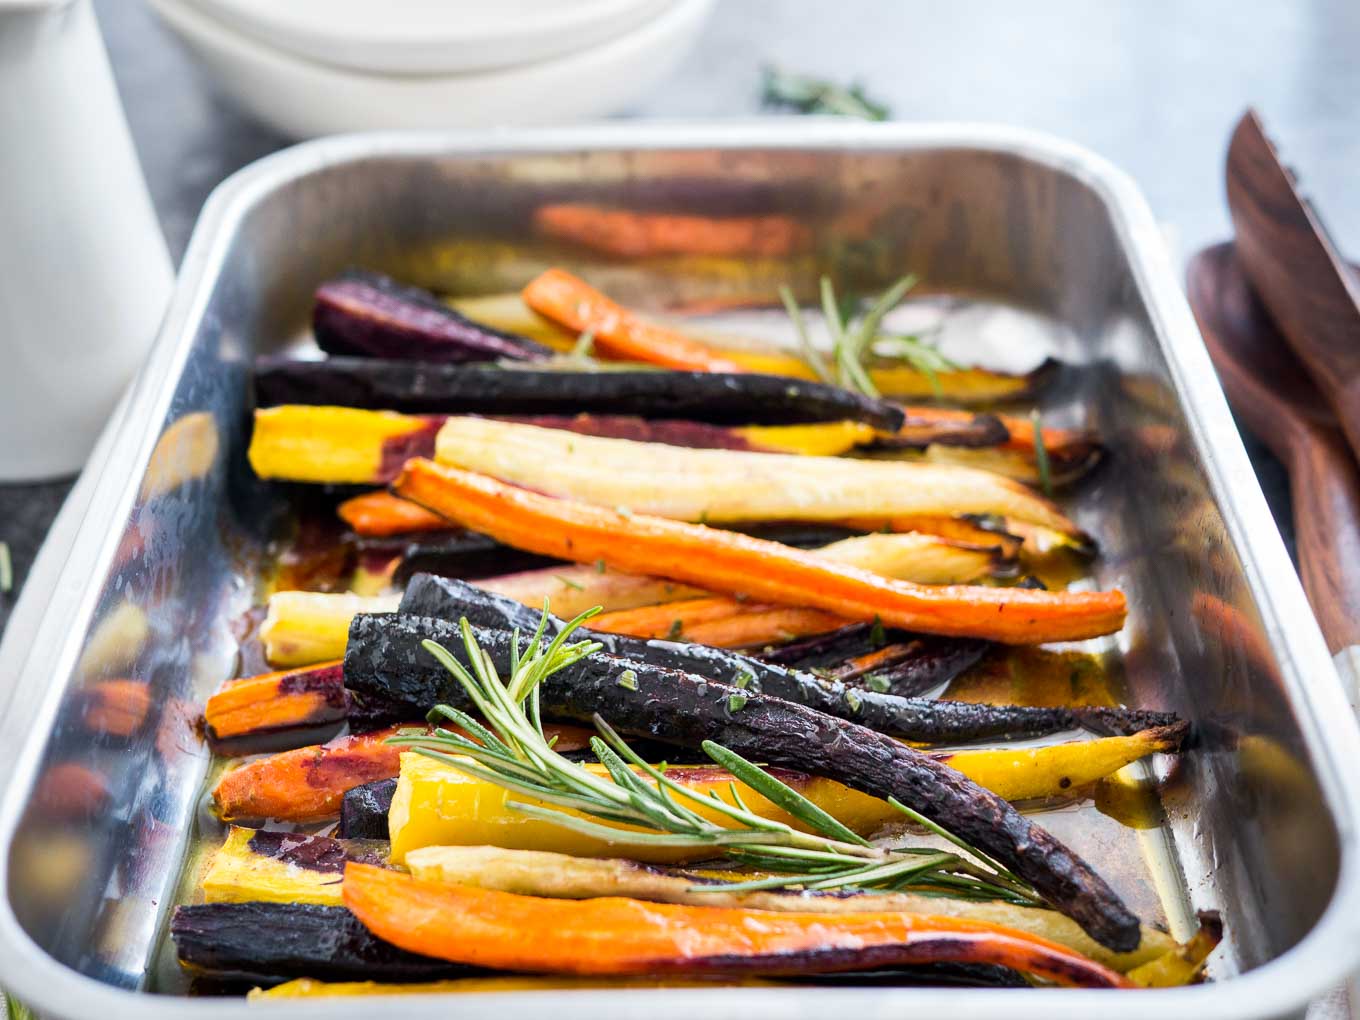 A roasting pan with roasted rainbow carrots garnished with sprigs of rosemary. There is a stack of plates in the background and salad tongs next to it.